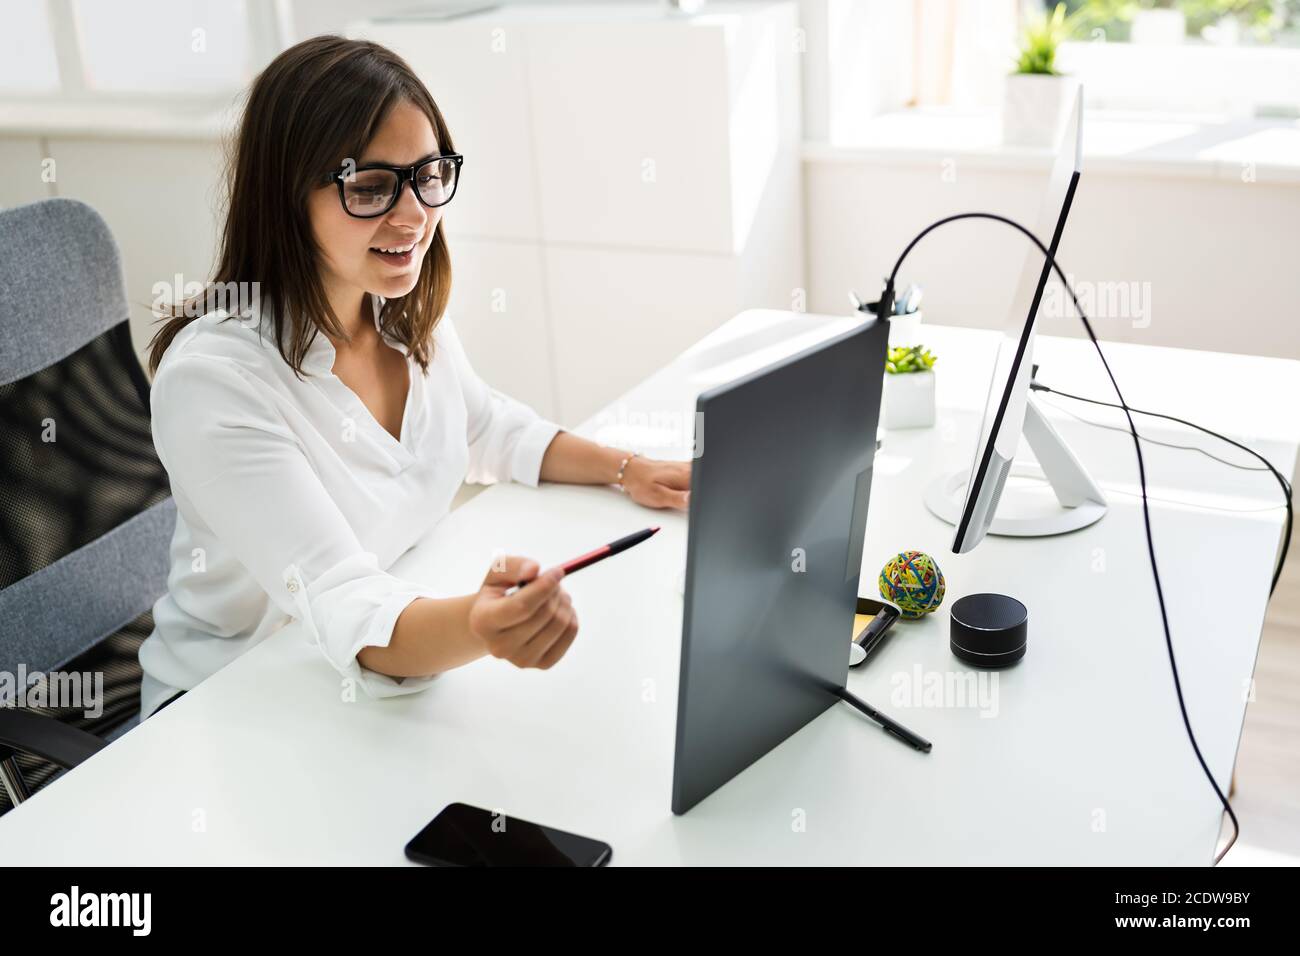 Business Executive Woman Working On Corporate Computer Stock Photo